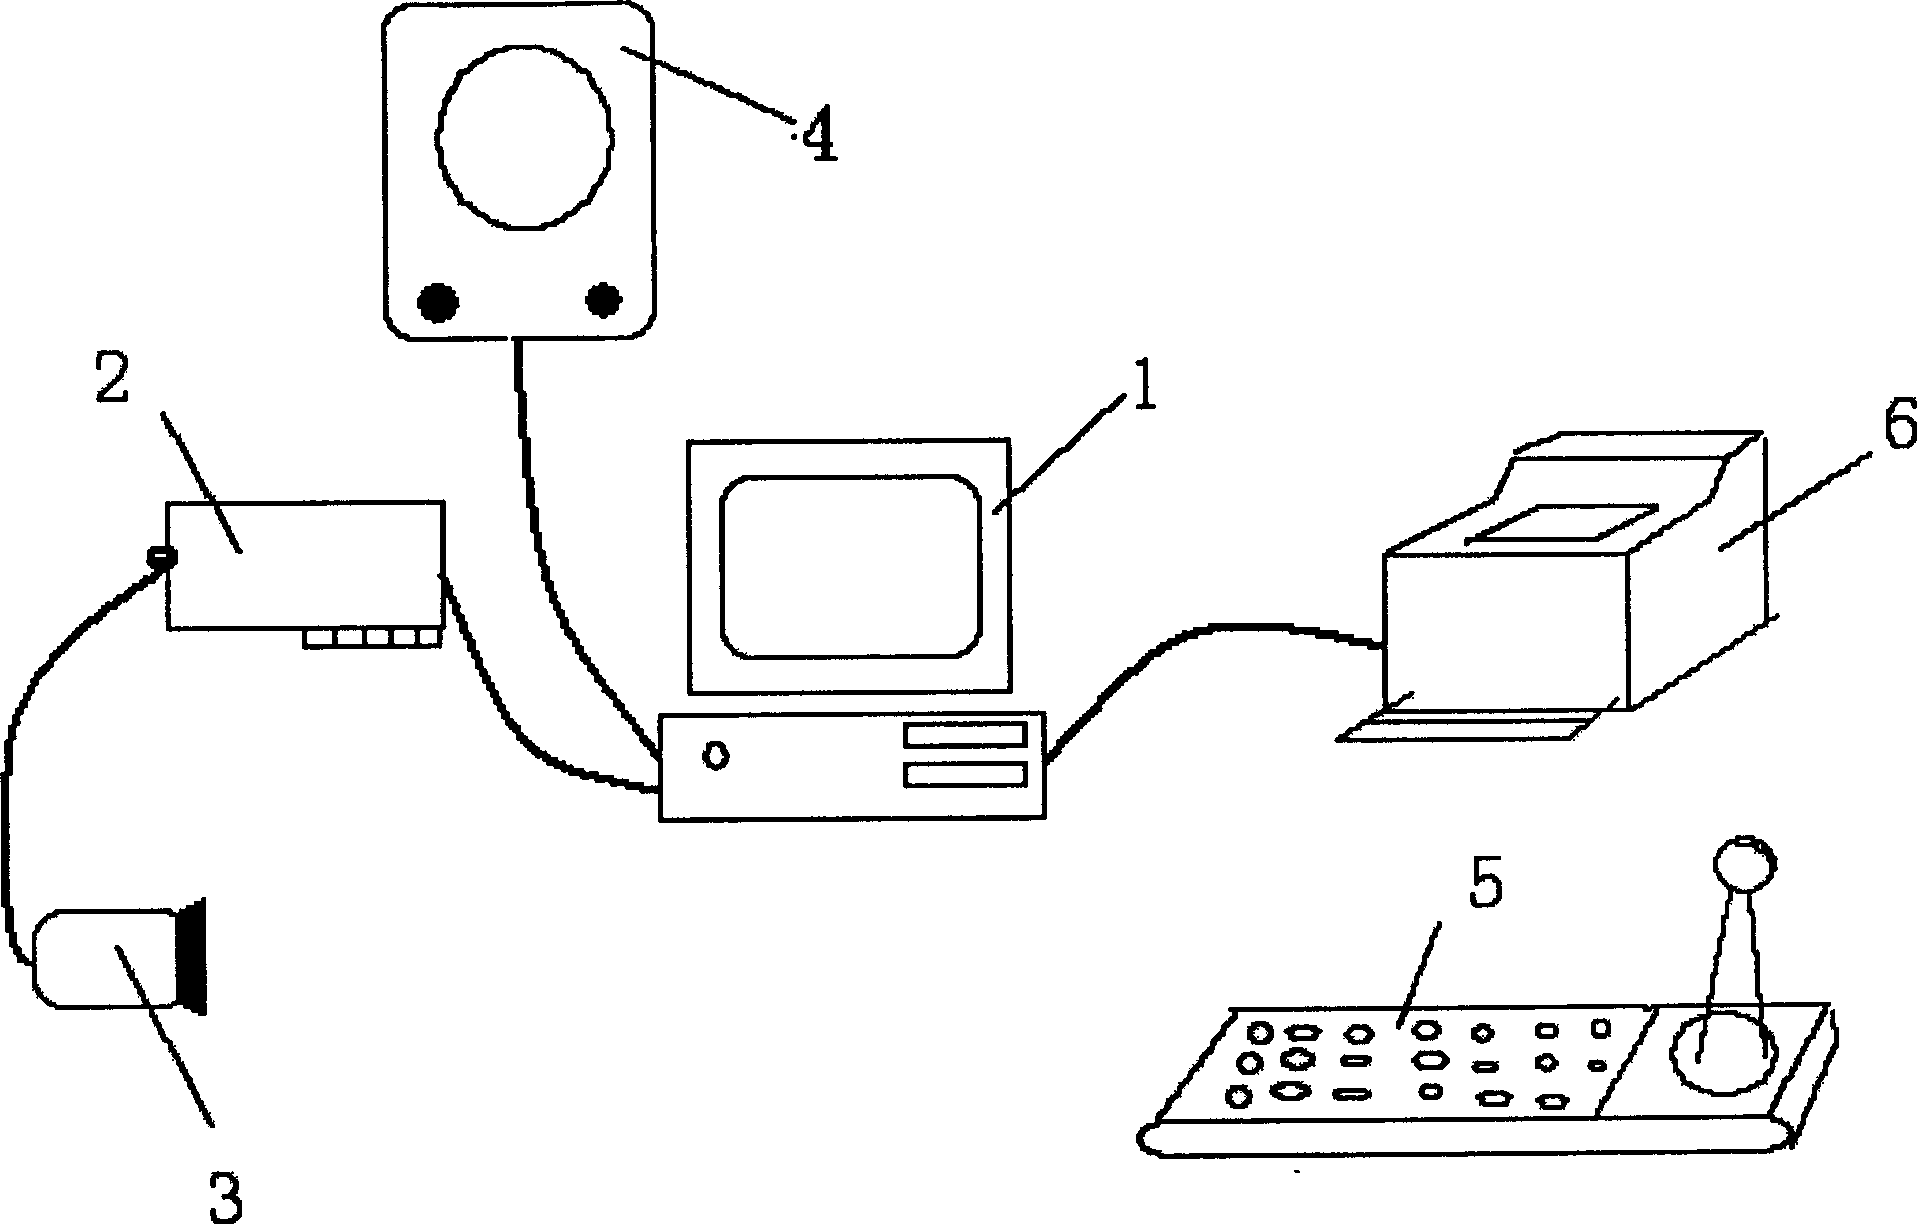 Vision detecting device based on computer media technology and its detecting method